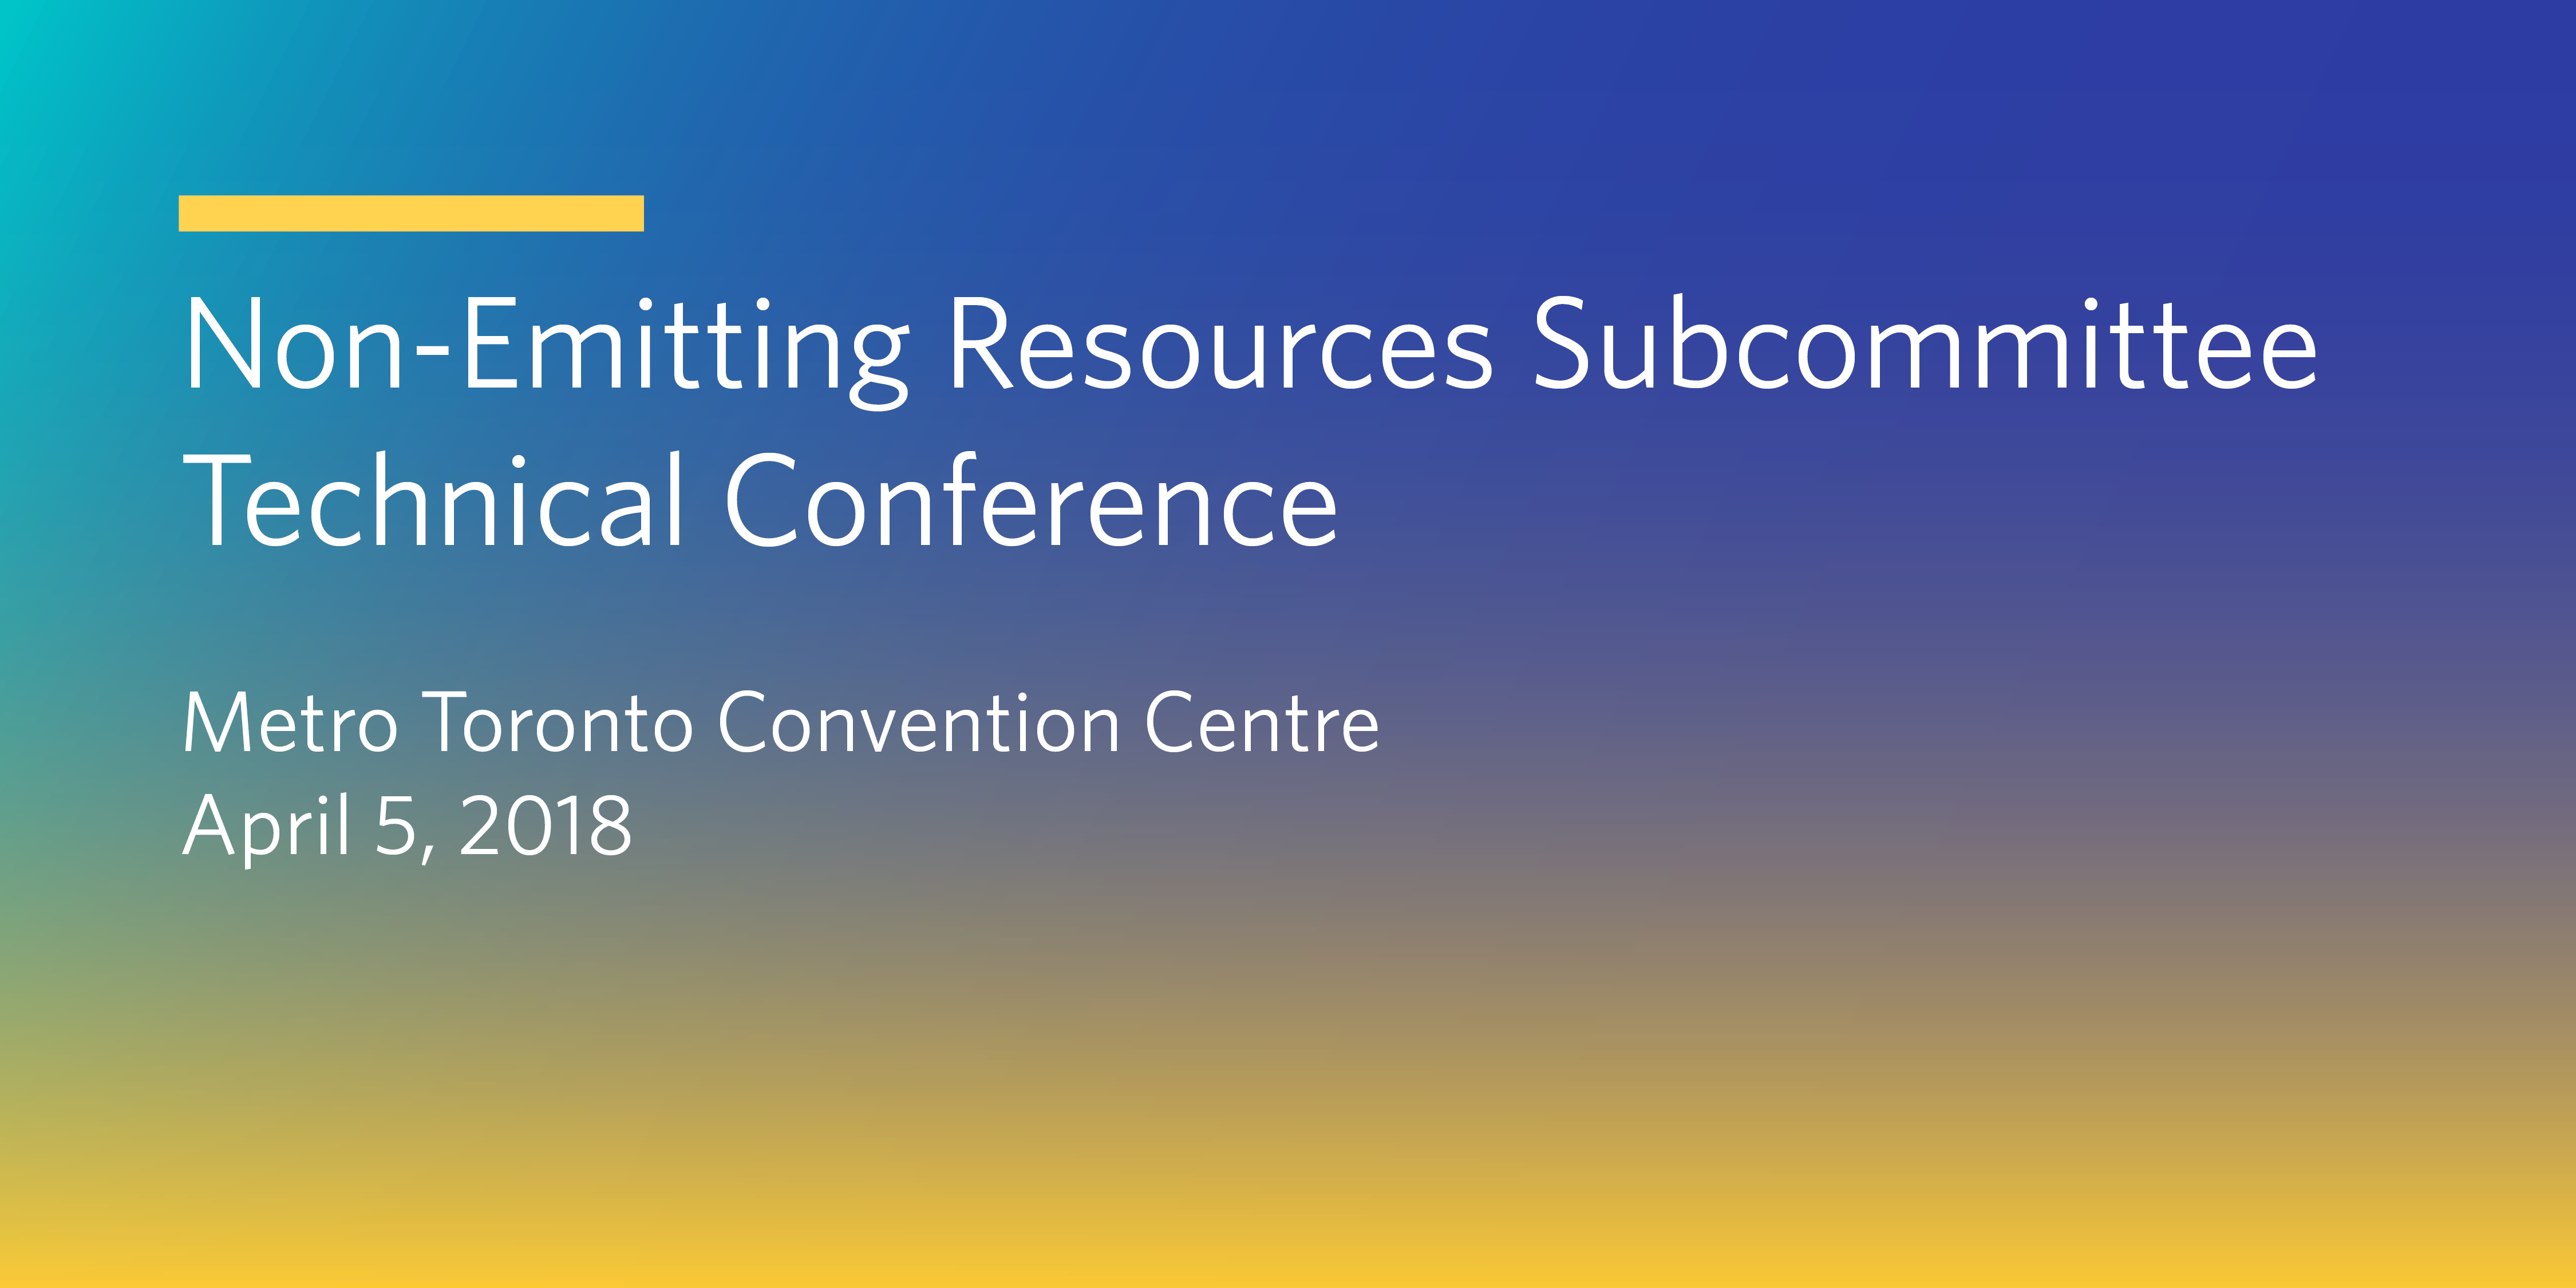 Non-Emitting Resource Subcommittee Technical Conference